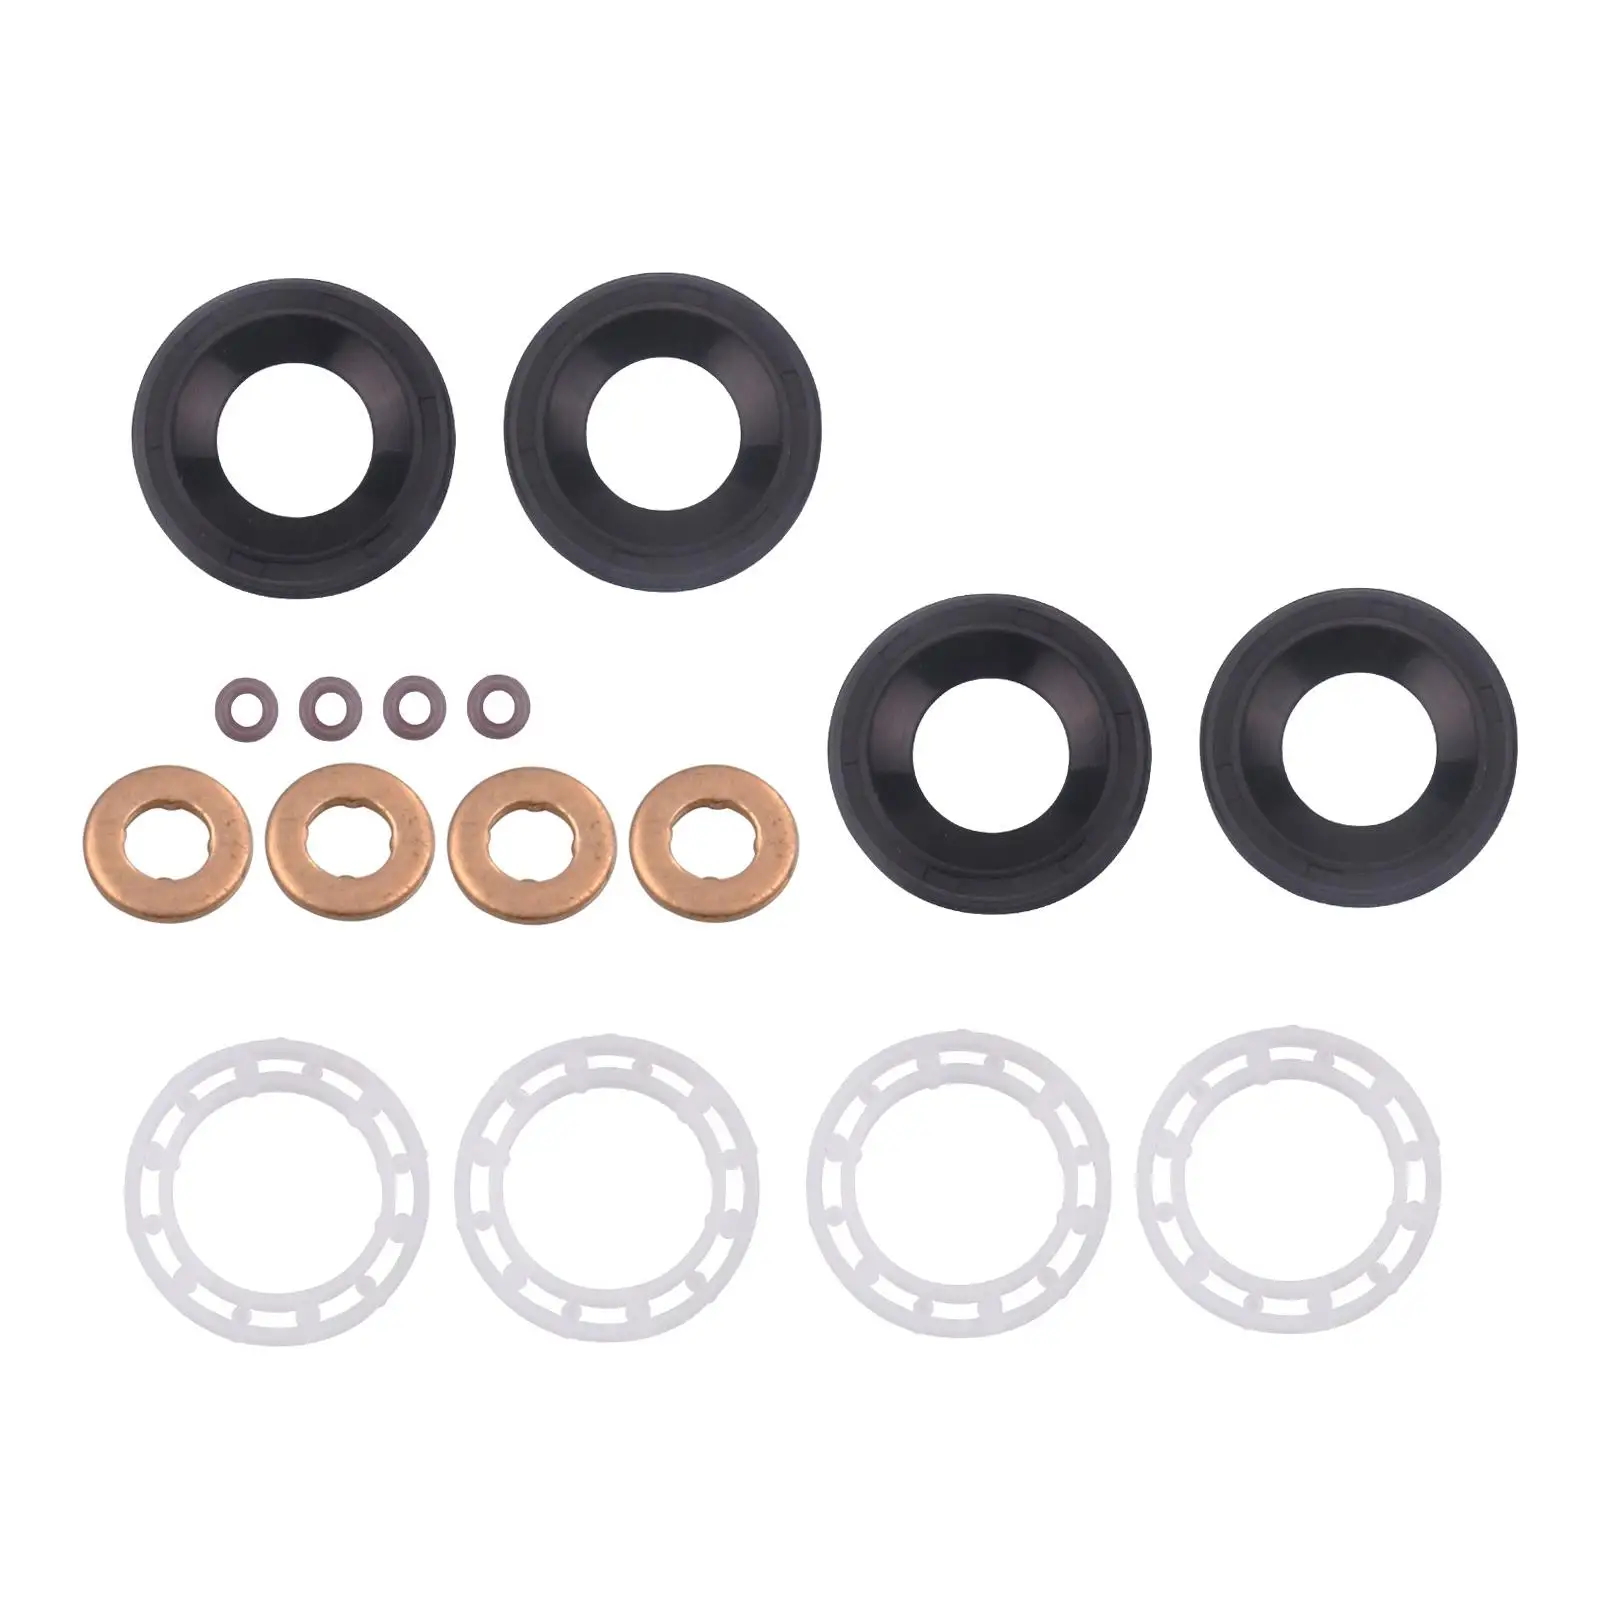 Seal Washer Protector injectors Seals 198299 Durable Copper Washers Diesel injectors for Peugeot Replacement Spare Parts